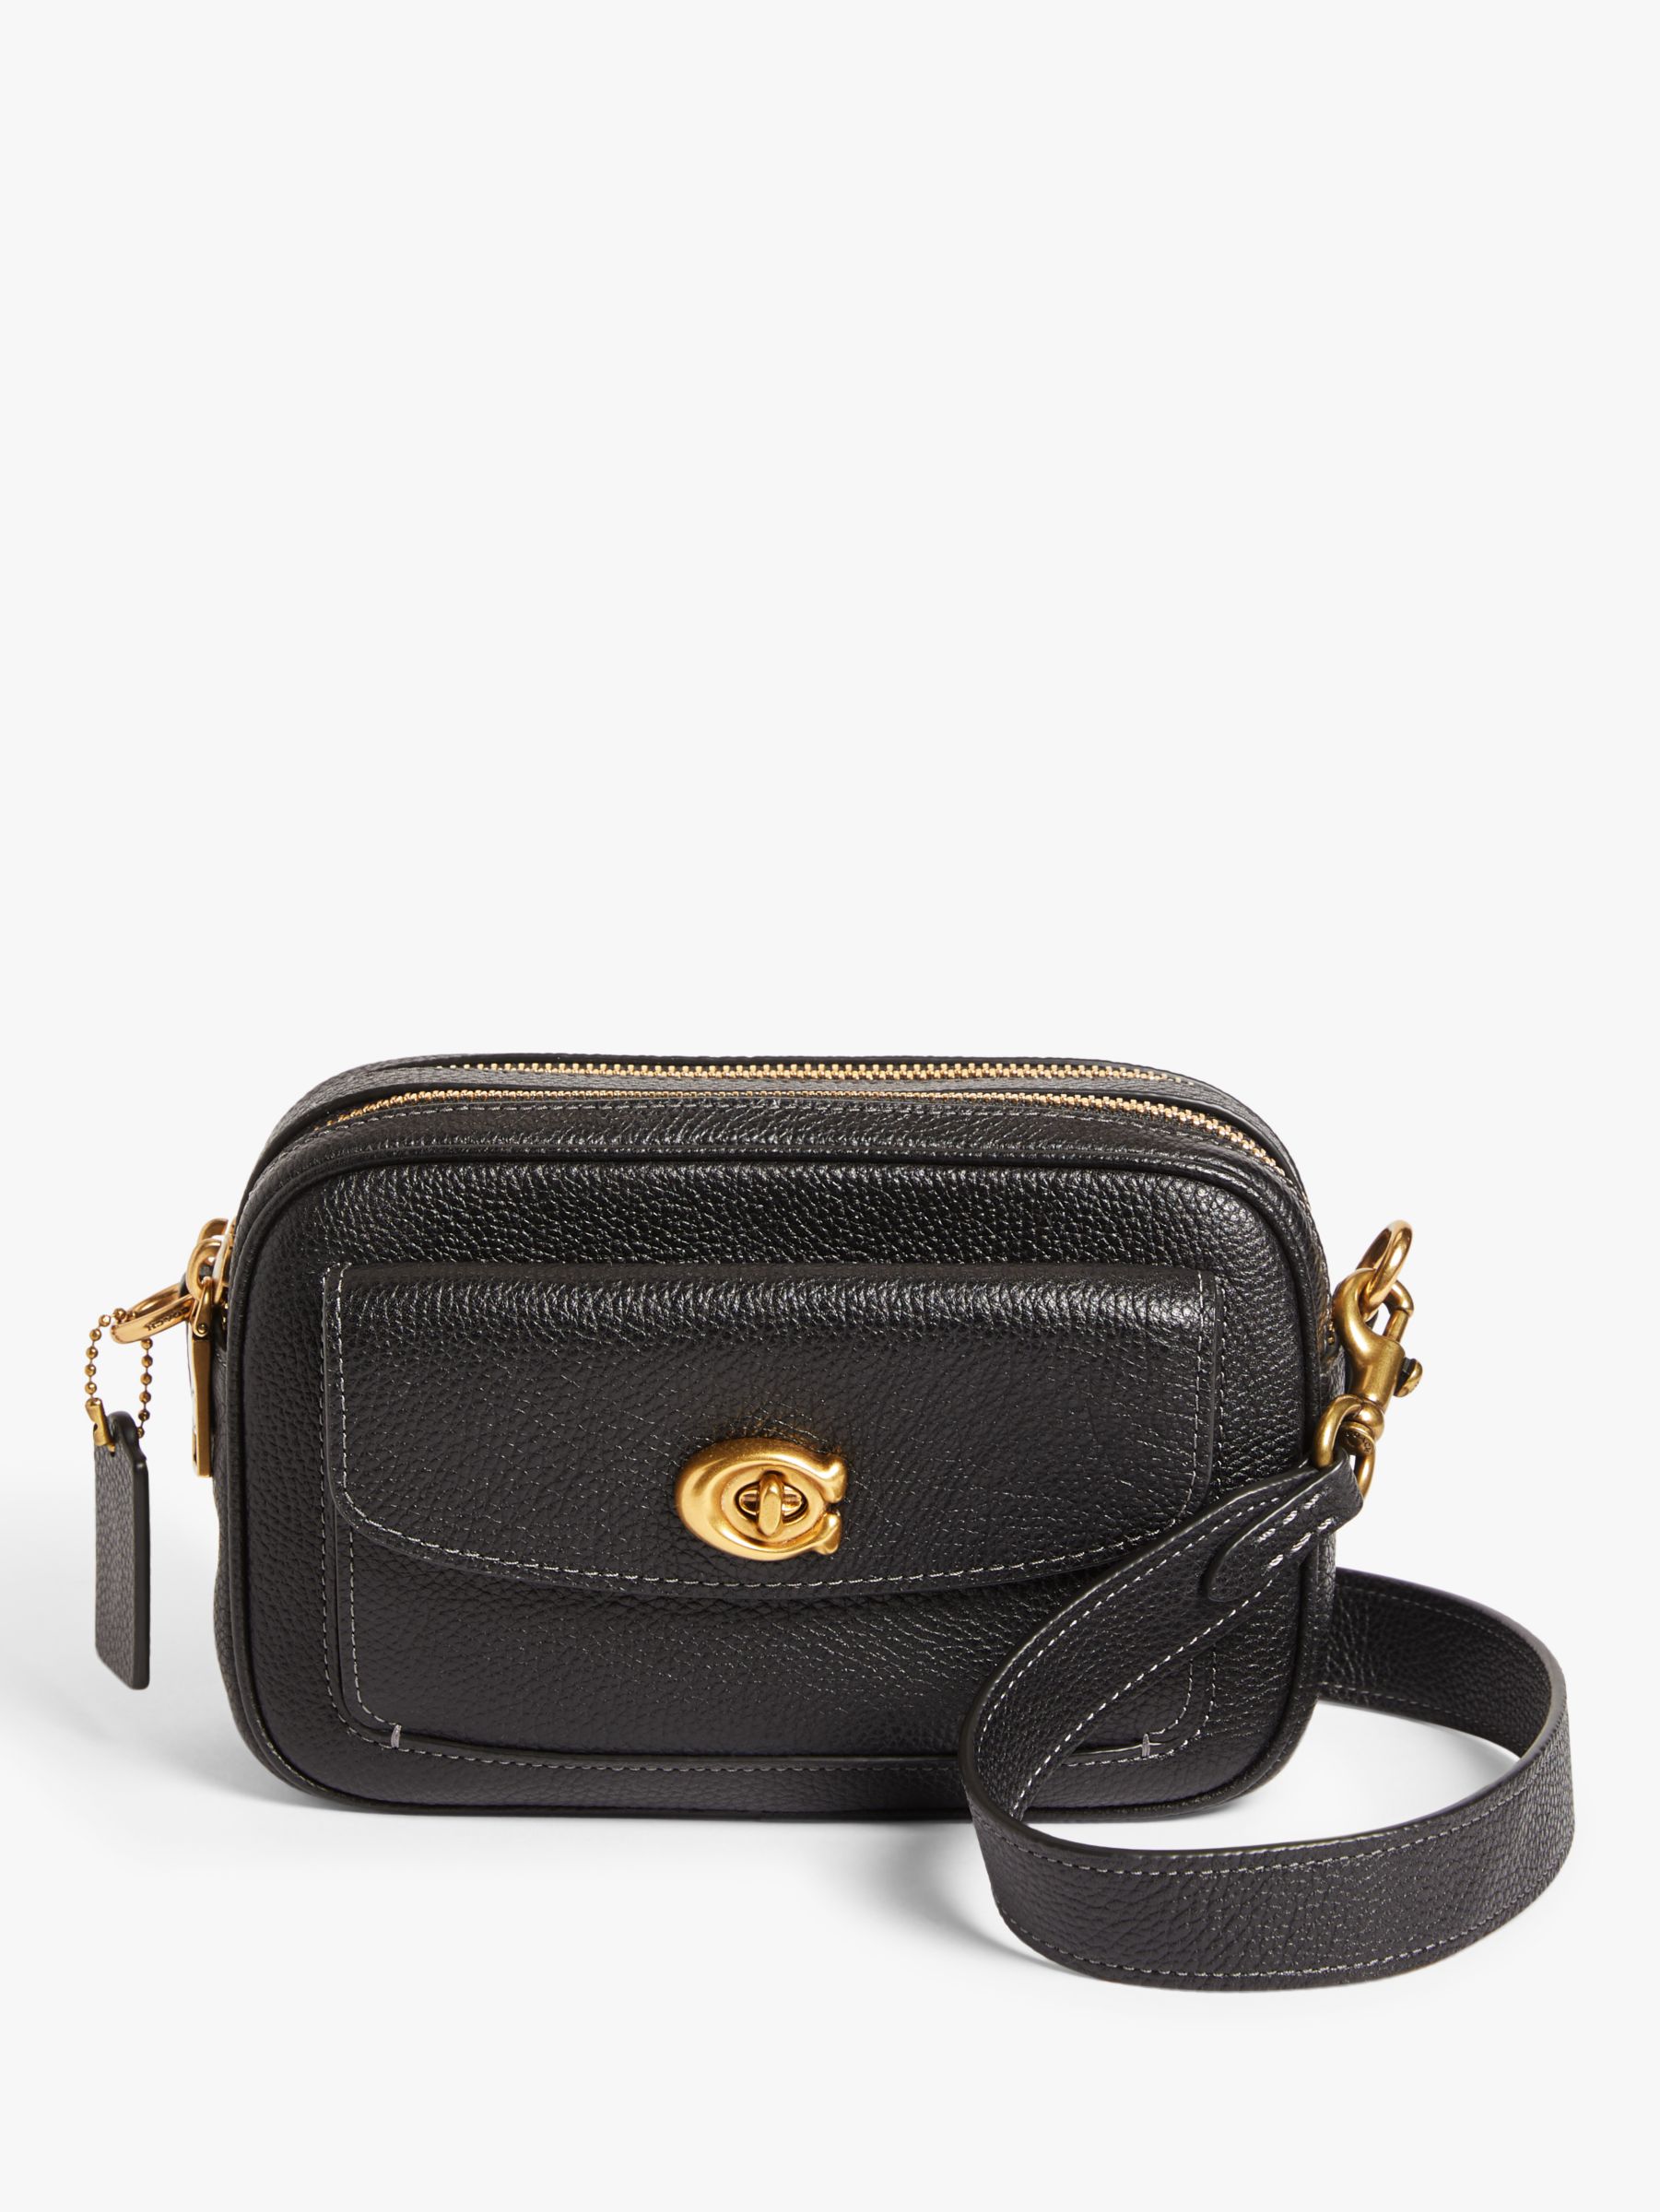 Coach Willow Leather Camera Bag, Black at John Lewis & Partners